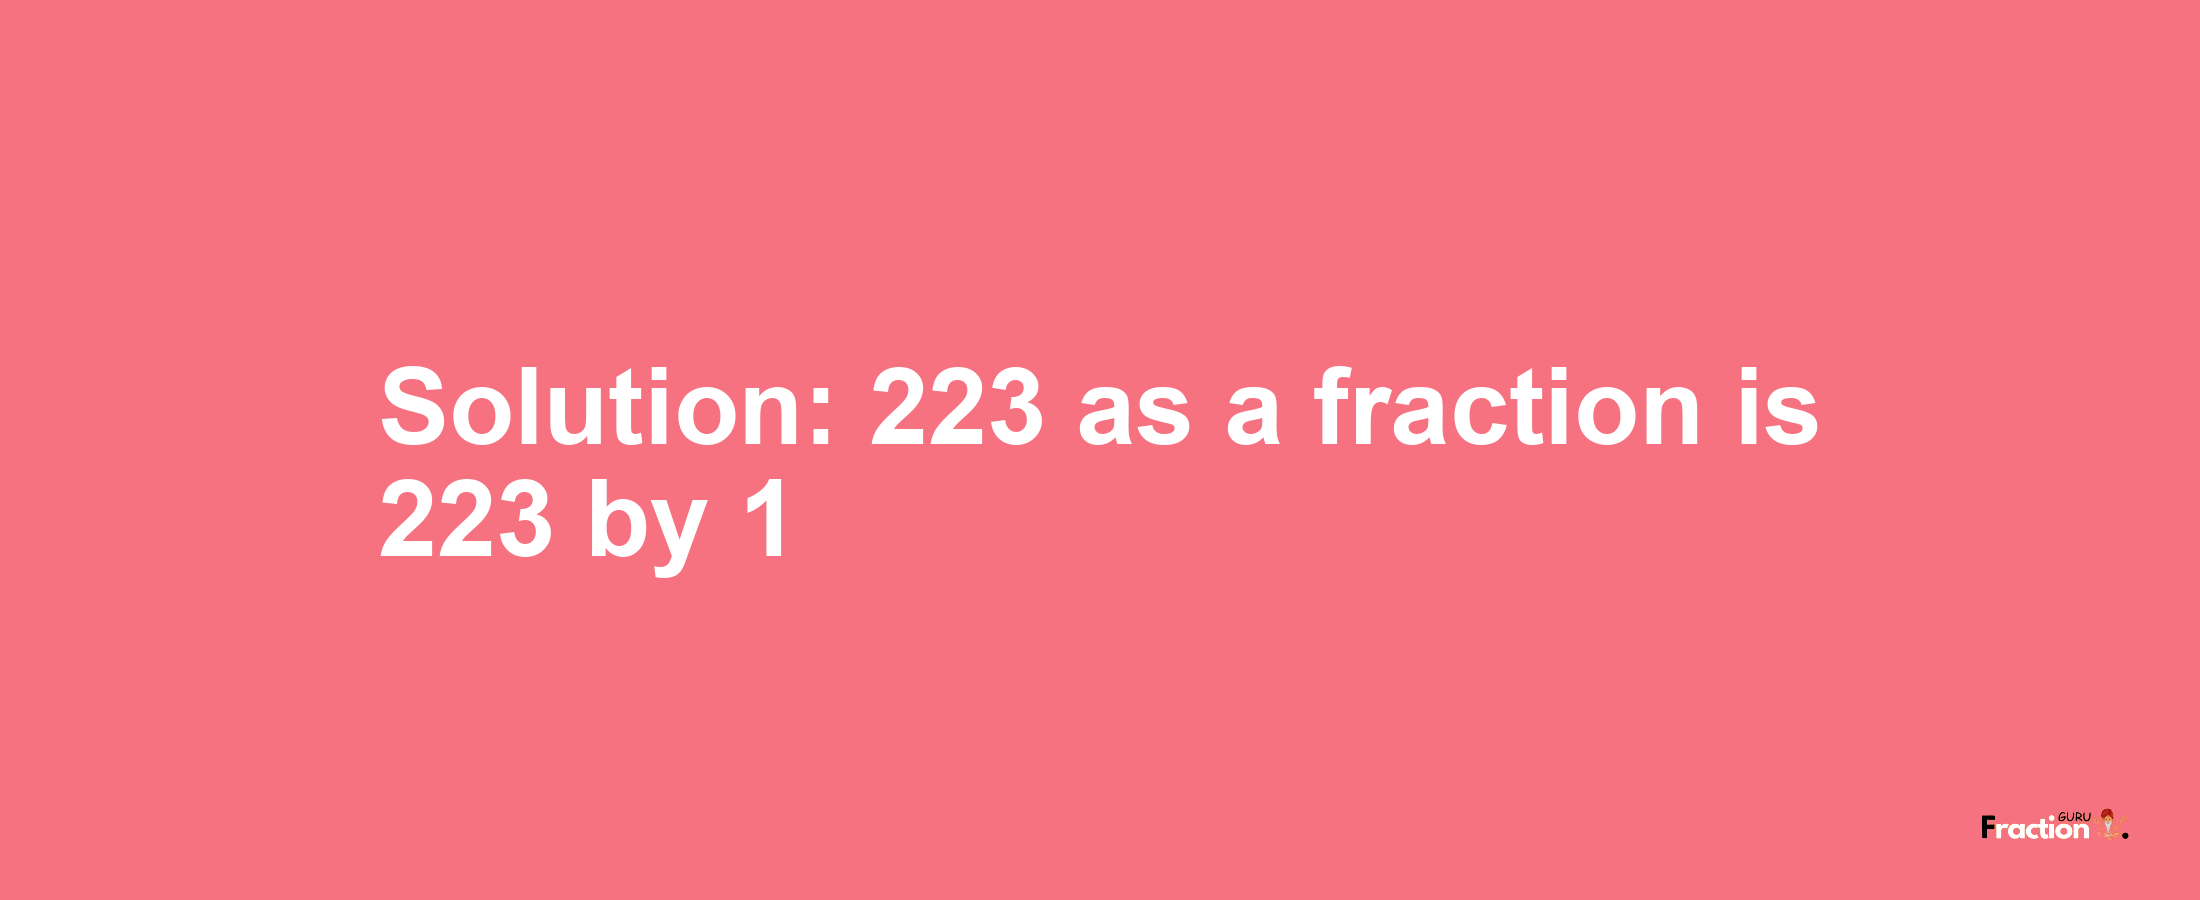 Solution:223 as a fraction is 223/1